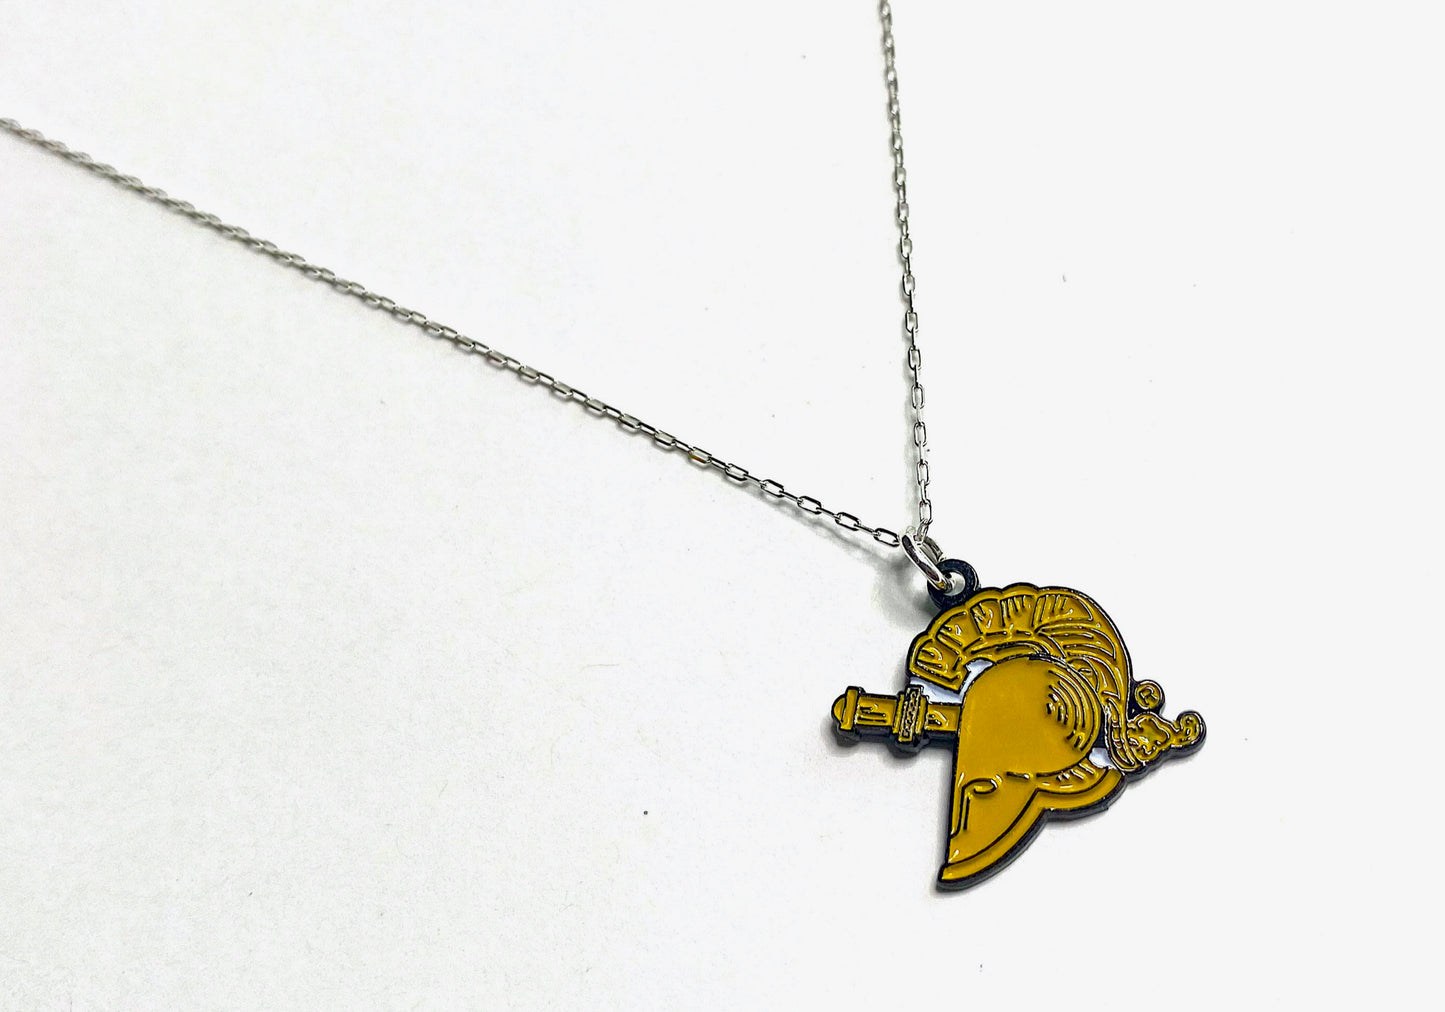 West Point Athena Gold Charm Necklace